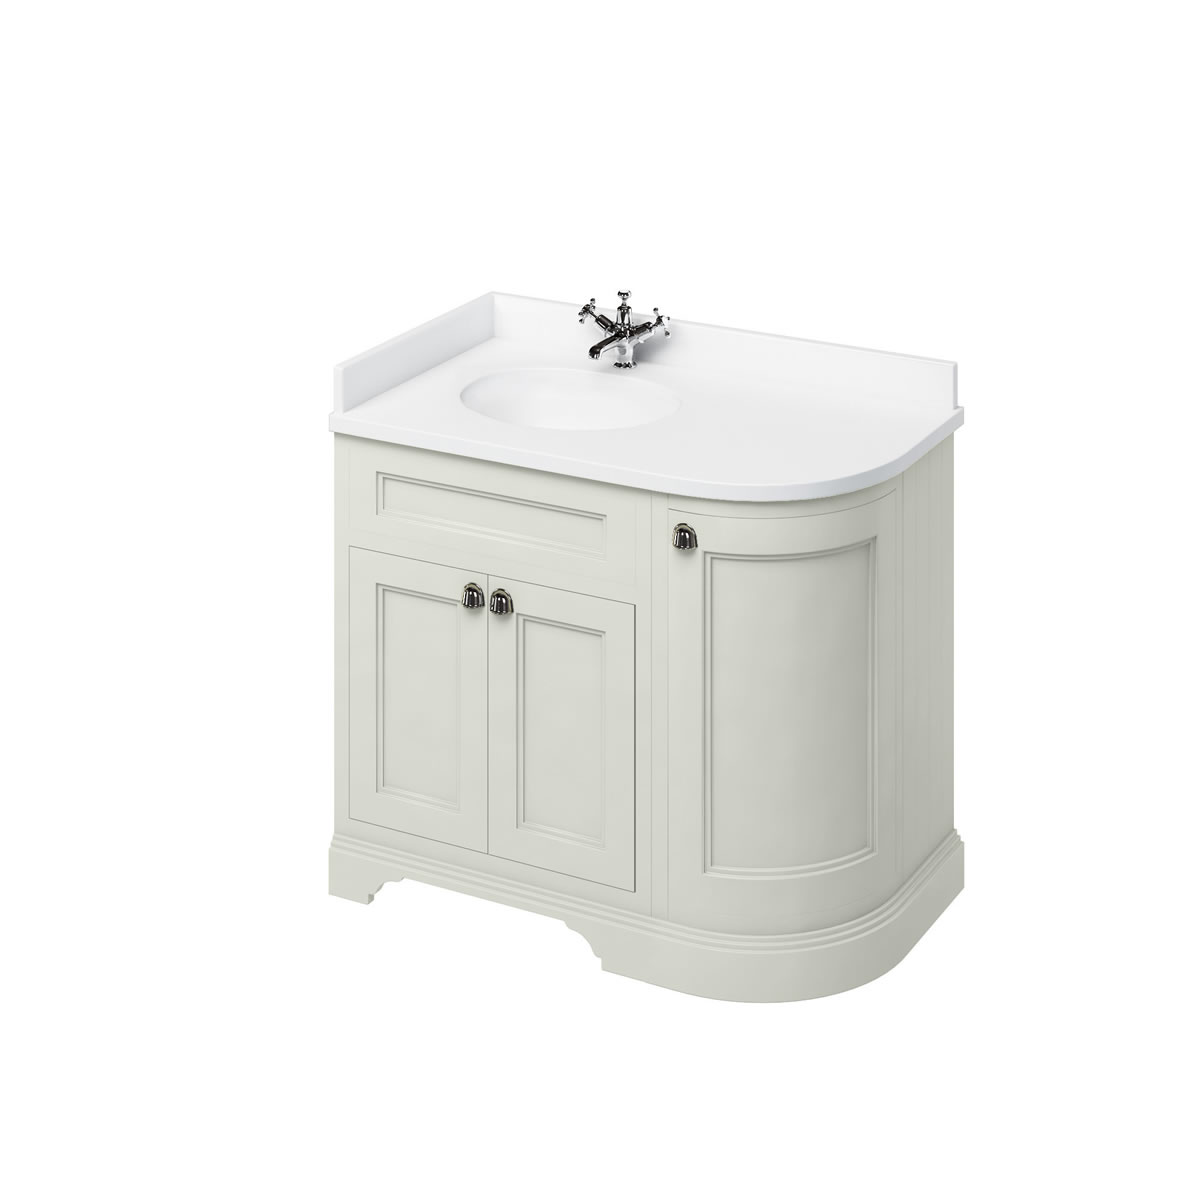 Freestanding 100 Curved Corner Vanity Unit Left Hand - Sand and Minerva white worktop with integrated white basin